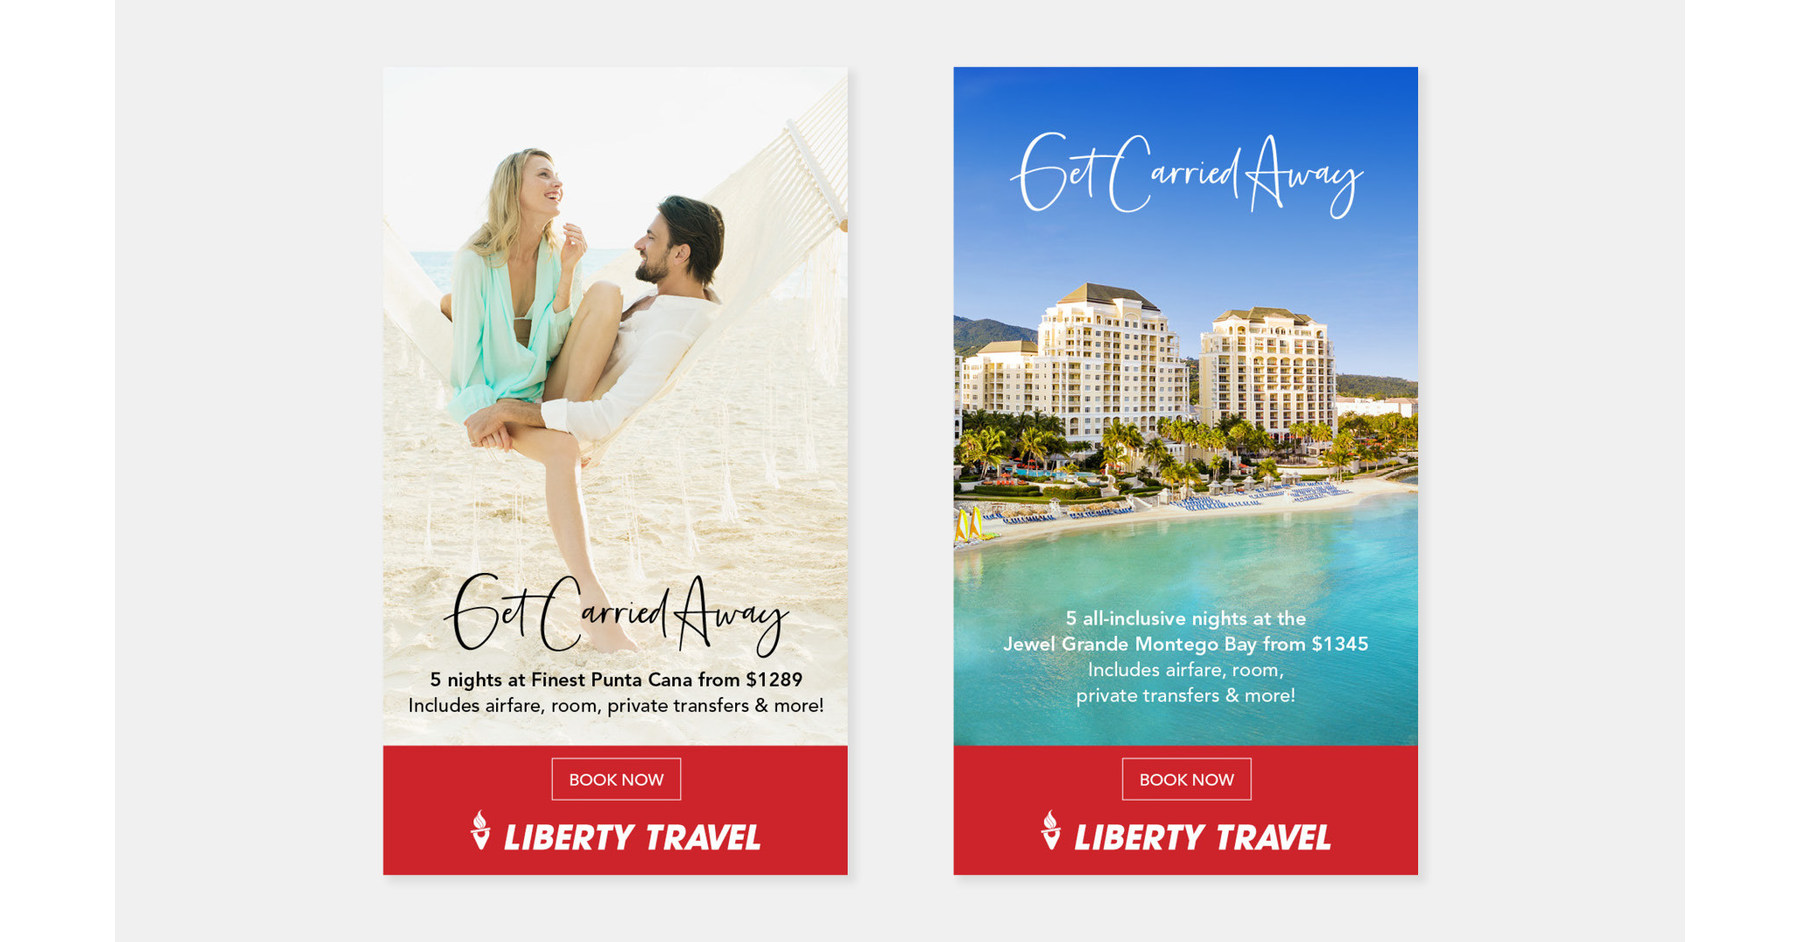 Liberty Travel Celebrates 70th Anniversary with Re-Launch of “Get Carried Away” All-In-One Packages